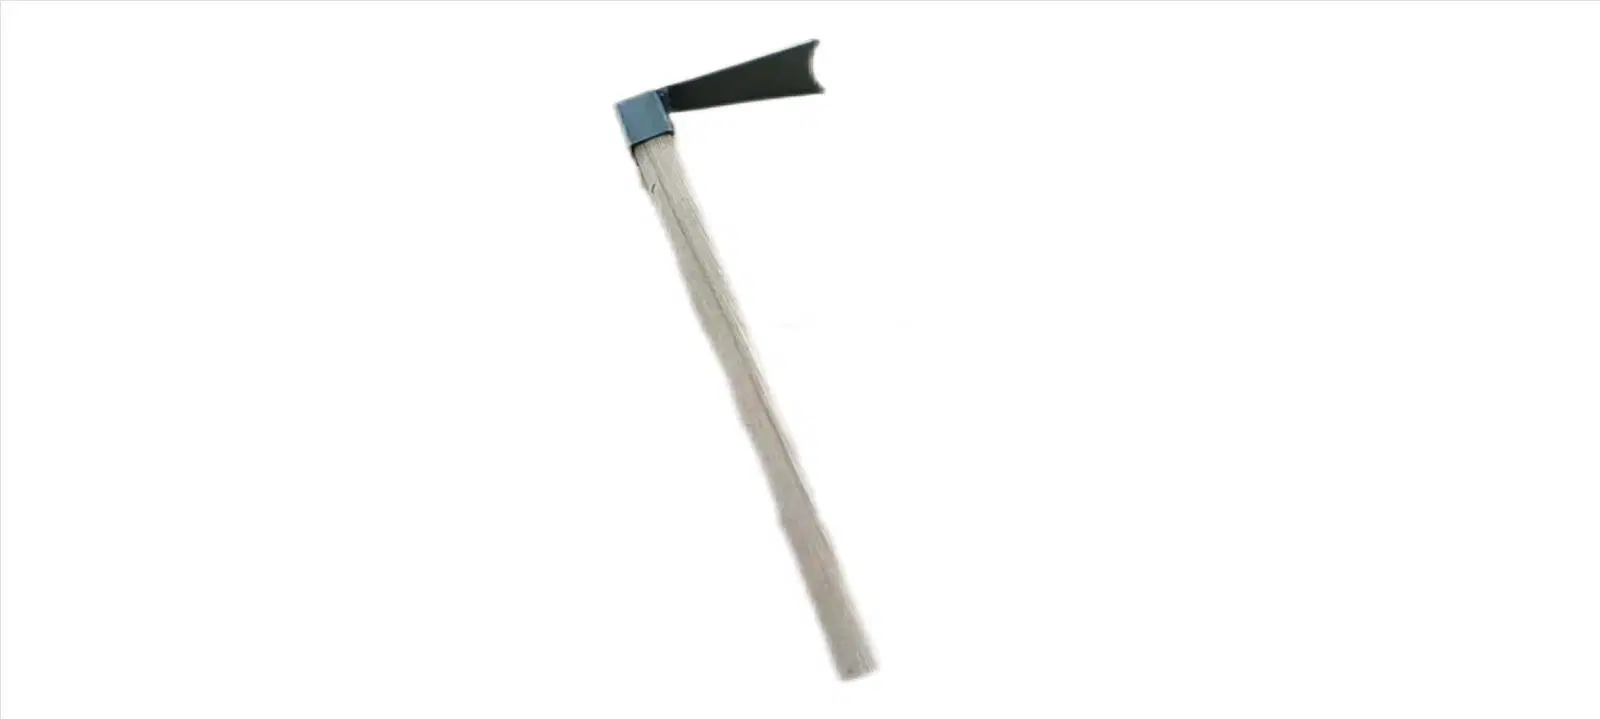 High quality/High cost performance Gardening Tool Wooden Handle Hoe for Home Garden Farming Agriculture Flower Planting Hand Tools